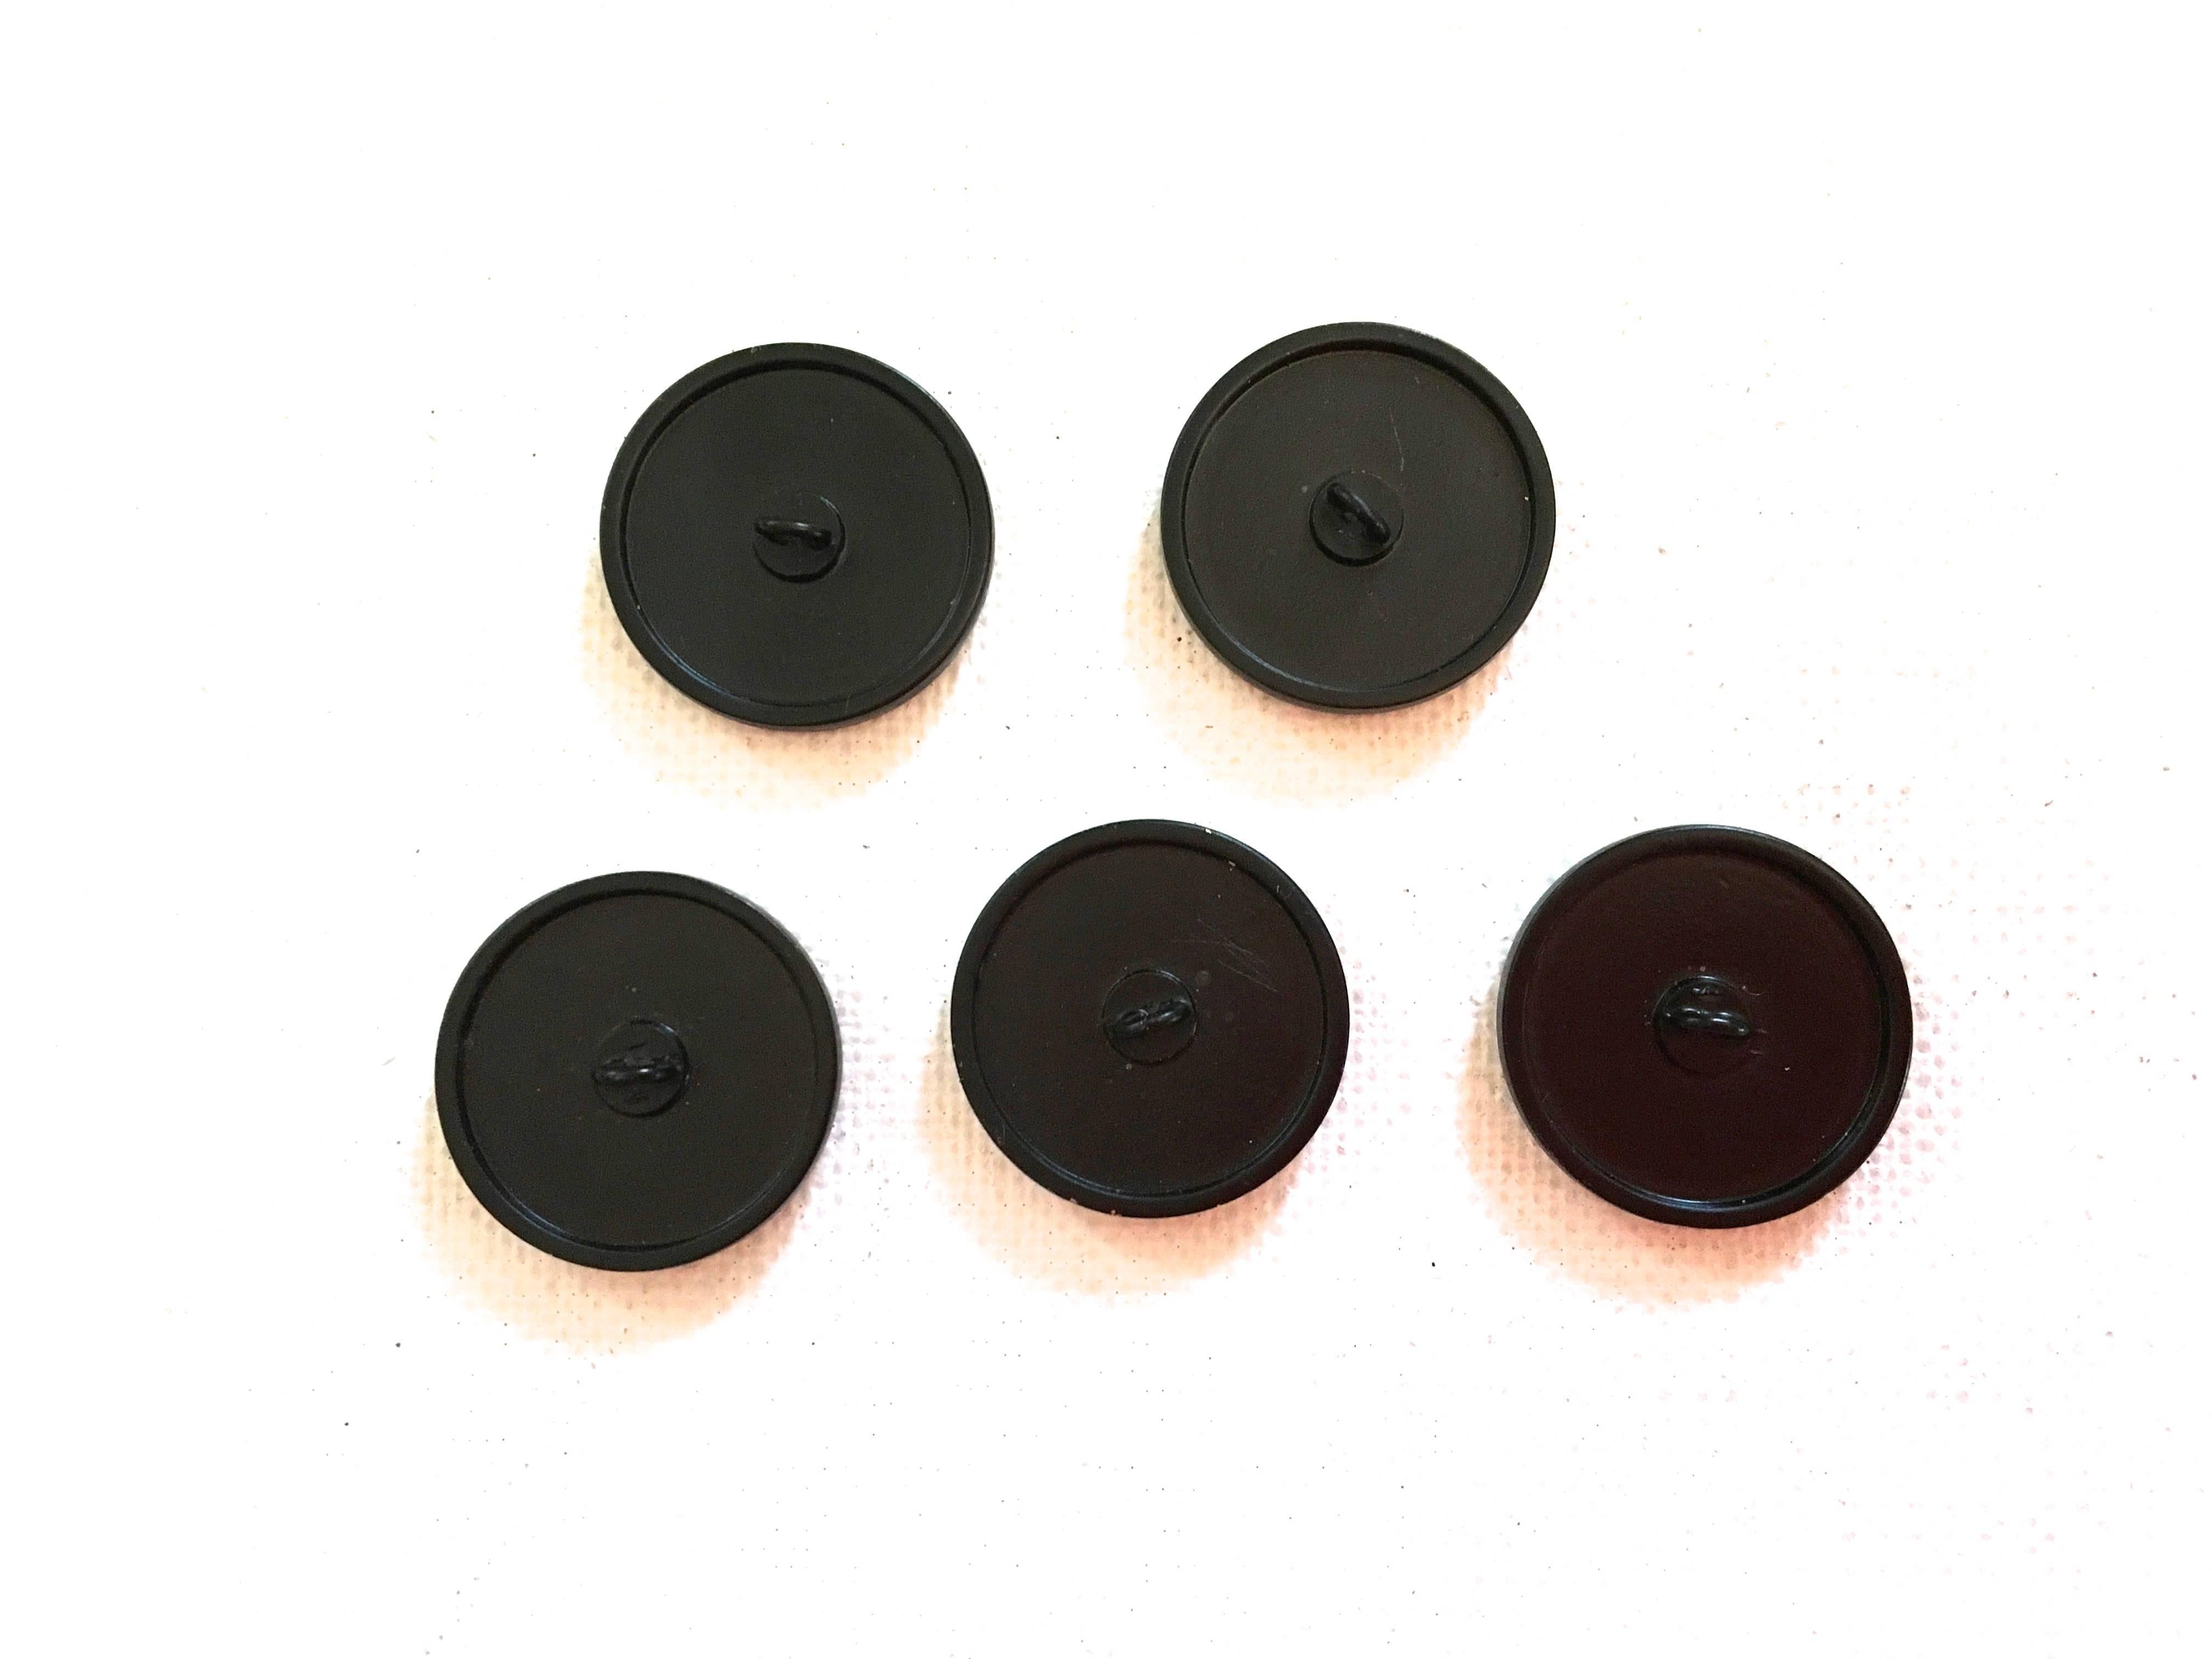 Chanel Buttons - Set of 5 - Black Metal - CC Logo For Sale 2